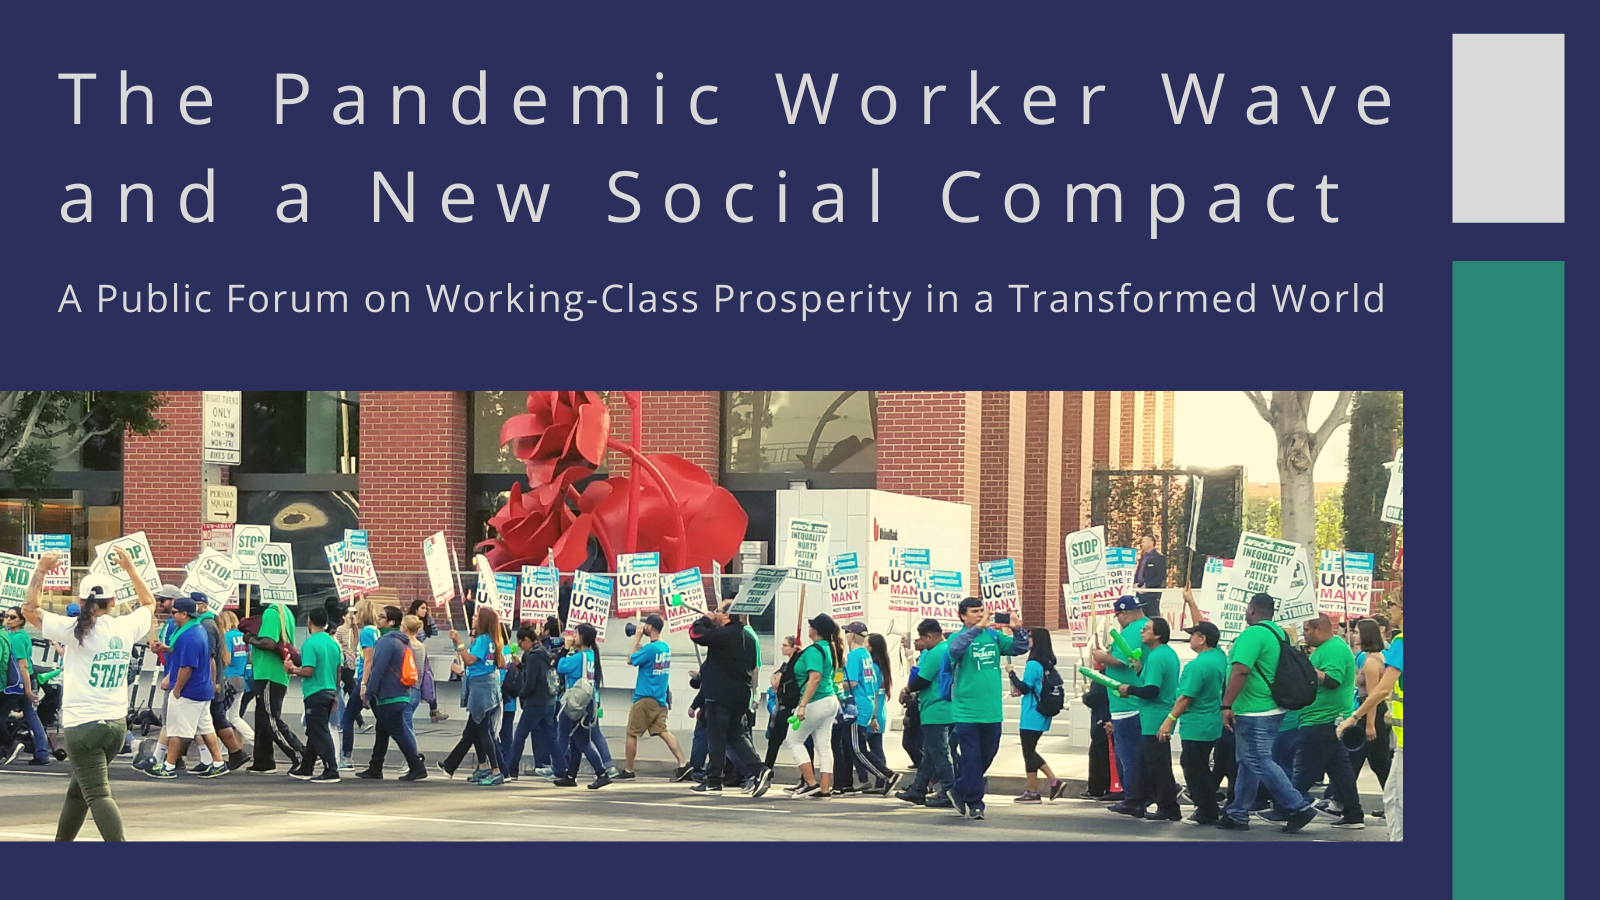 Protester with caption "The Pandemic Worker Wave and a New Social Compact: A Public Forum on Working-Class Prosperity in a Transformed World"